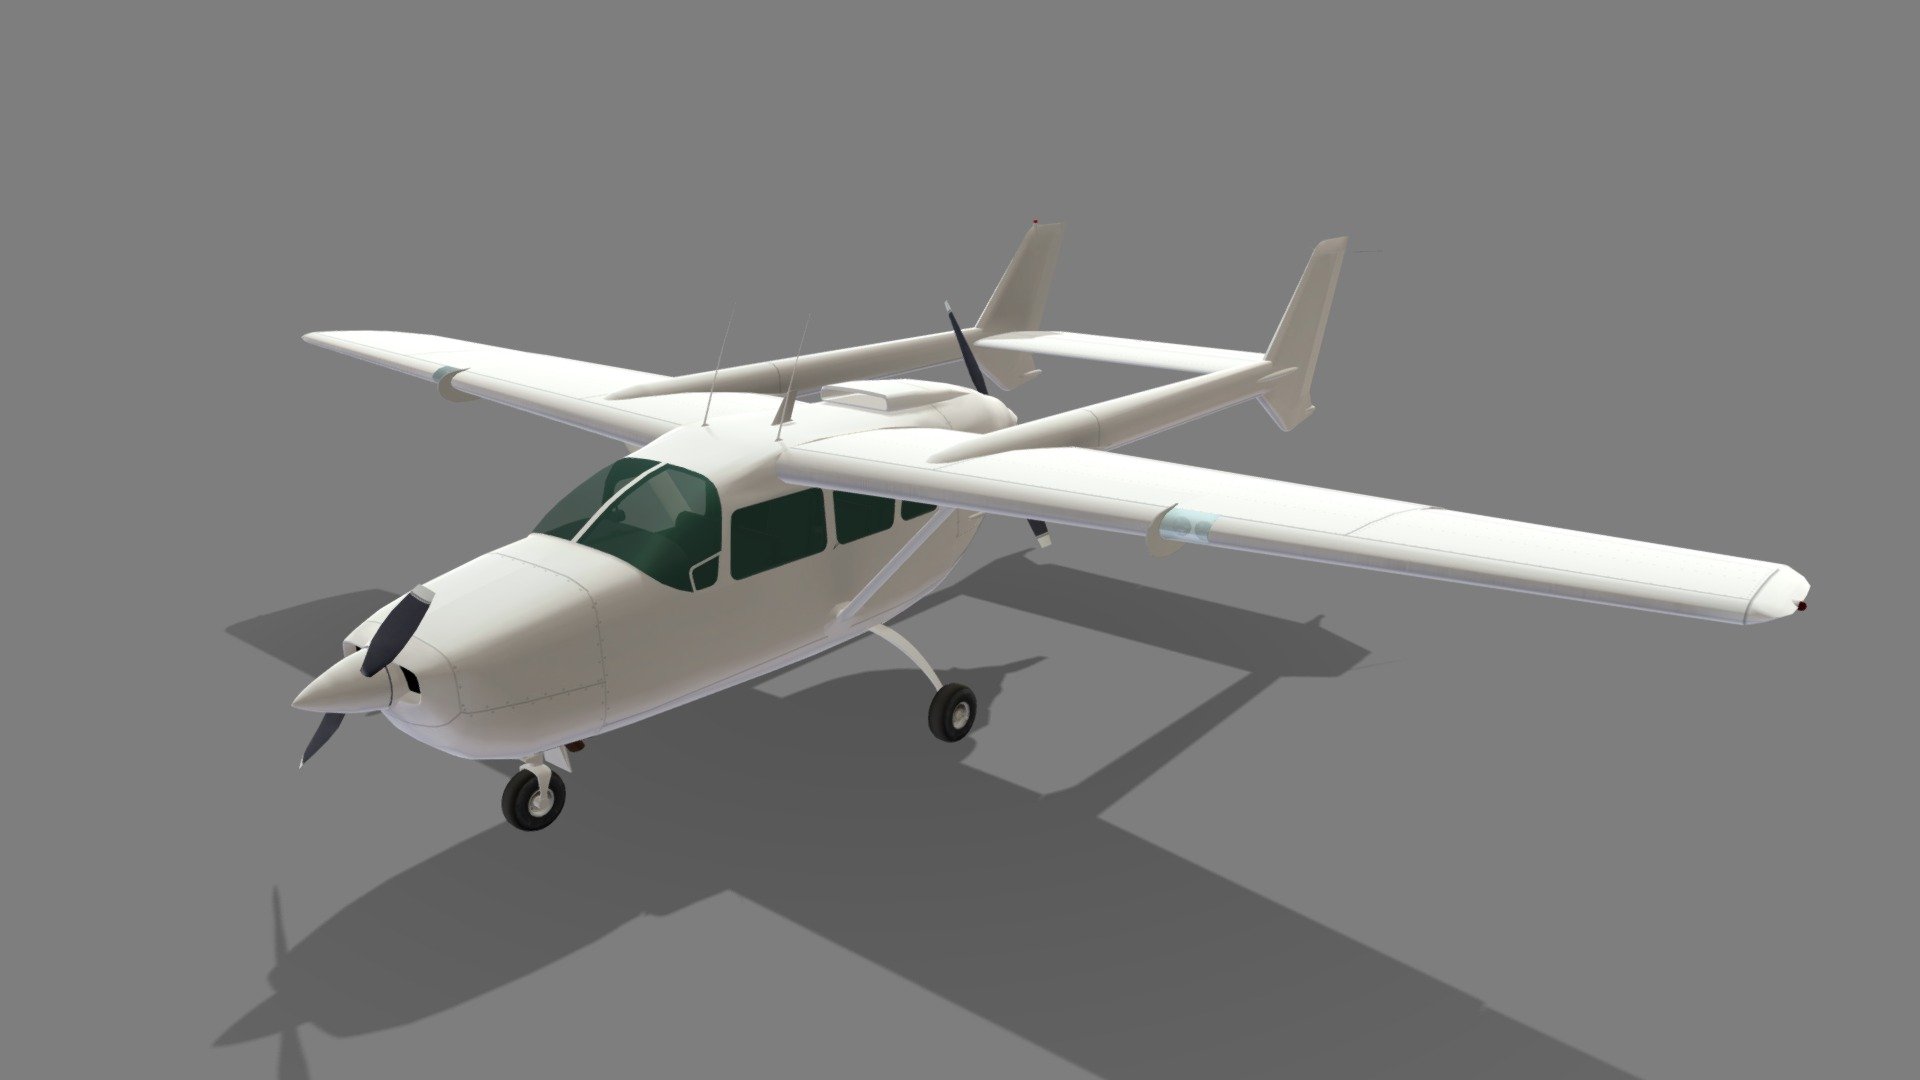 The Cessna Skymaster is an American twin-engine civil utility aircraft built in a push-pull configuration.

optimized for minimal complexity with less than 5000 polygons. Despite its low polygon count, the model accurately captures the iconic design and aerodynamic features of the Cessna 152, making it ideal for real-time rendering in games or simulations.

The model comes with a blank layered texture, providing a clean slate for customization. This allows you to apply your own color schemes, decals, or airline branding. The layered structure of the texture file offers flexibility in modifying different parts of the aircraft separately, such as the fuselage, wings, engines, and tail.

In summary, this Cessna 337 low-poly model is a perfect blend of simplicity, accuracy, and customizability, making it a versatile asset for any 3D project 3d model